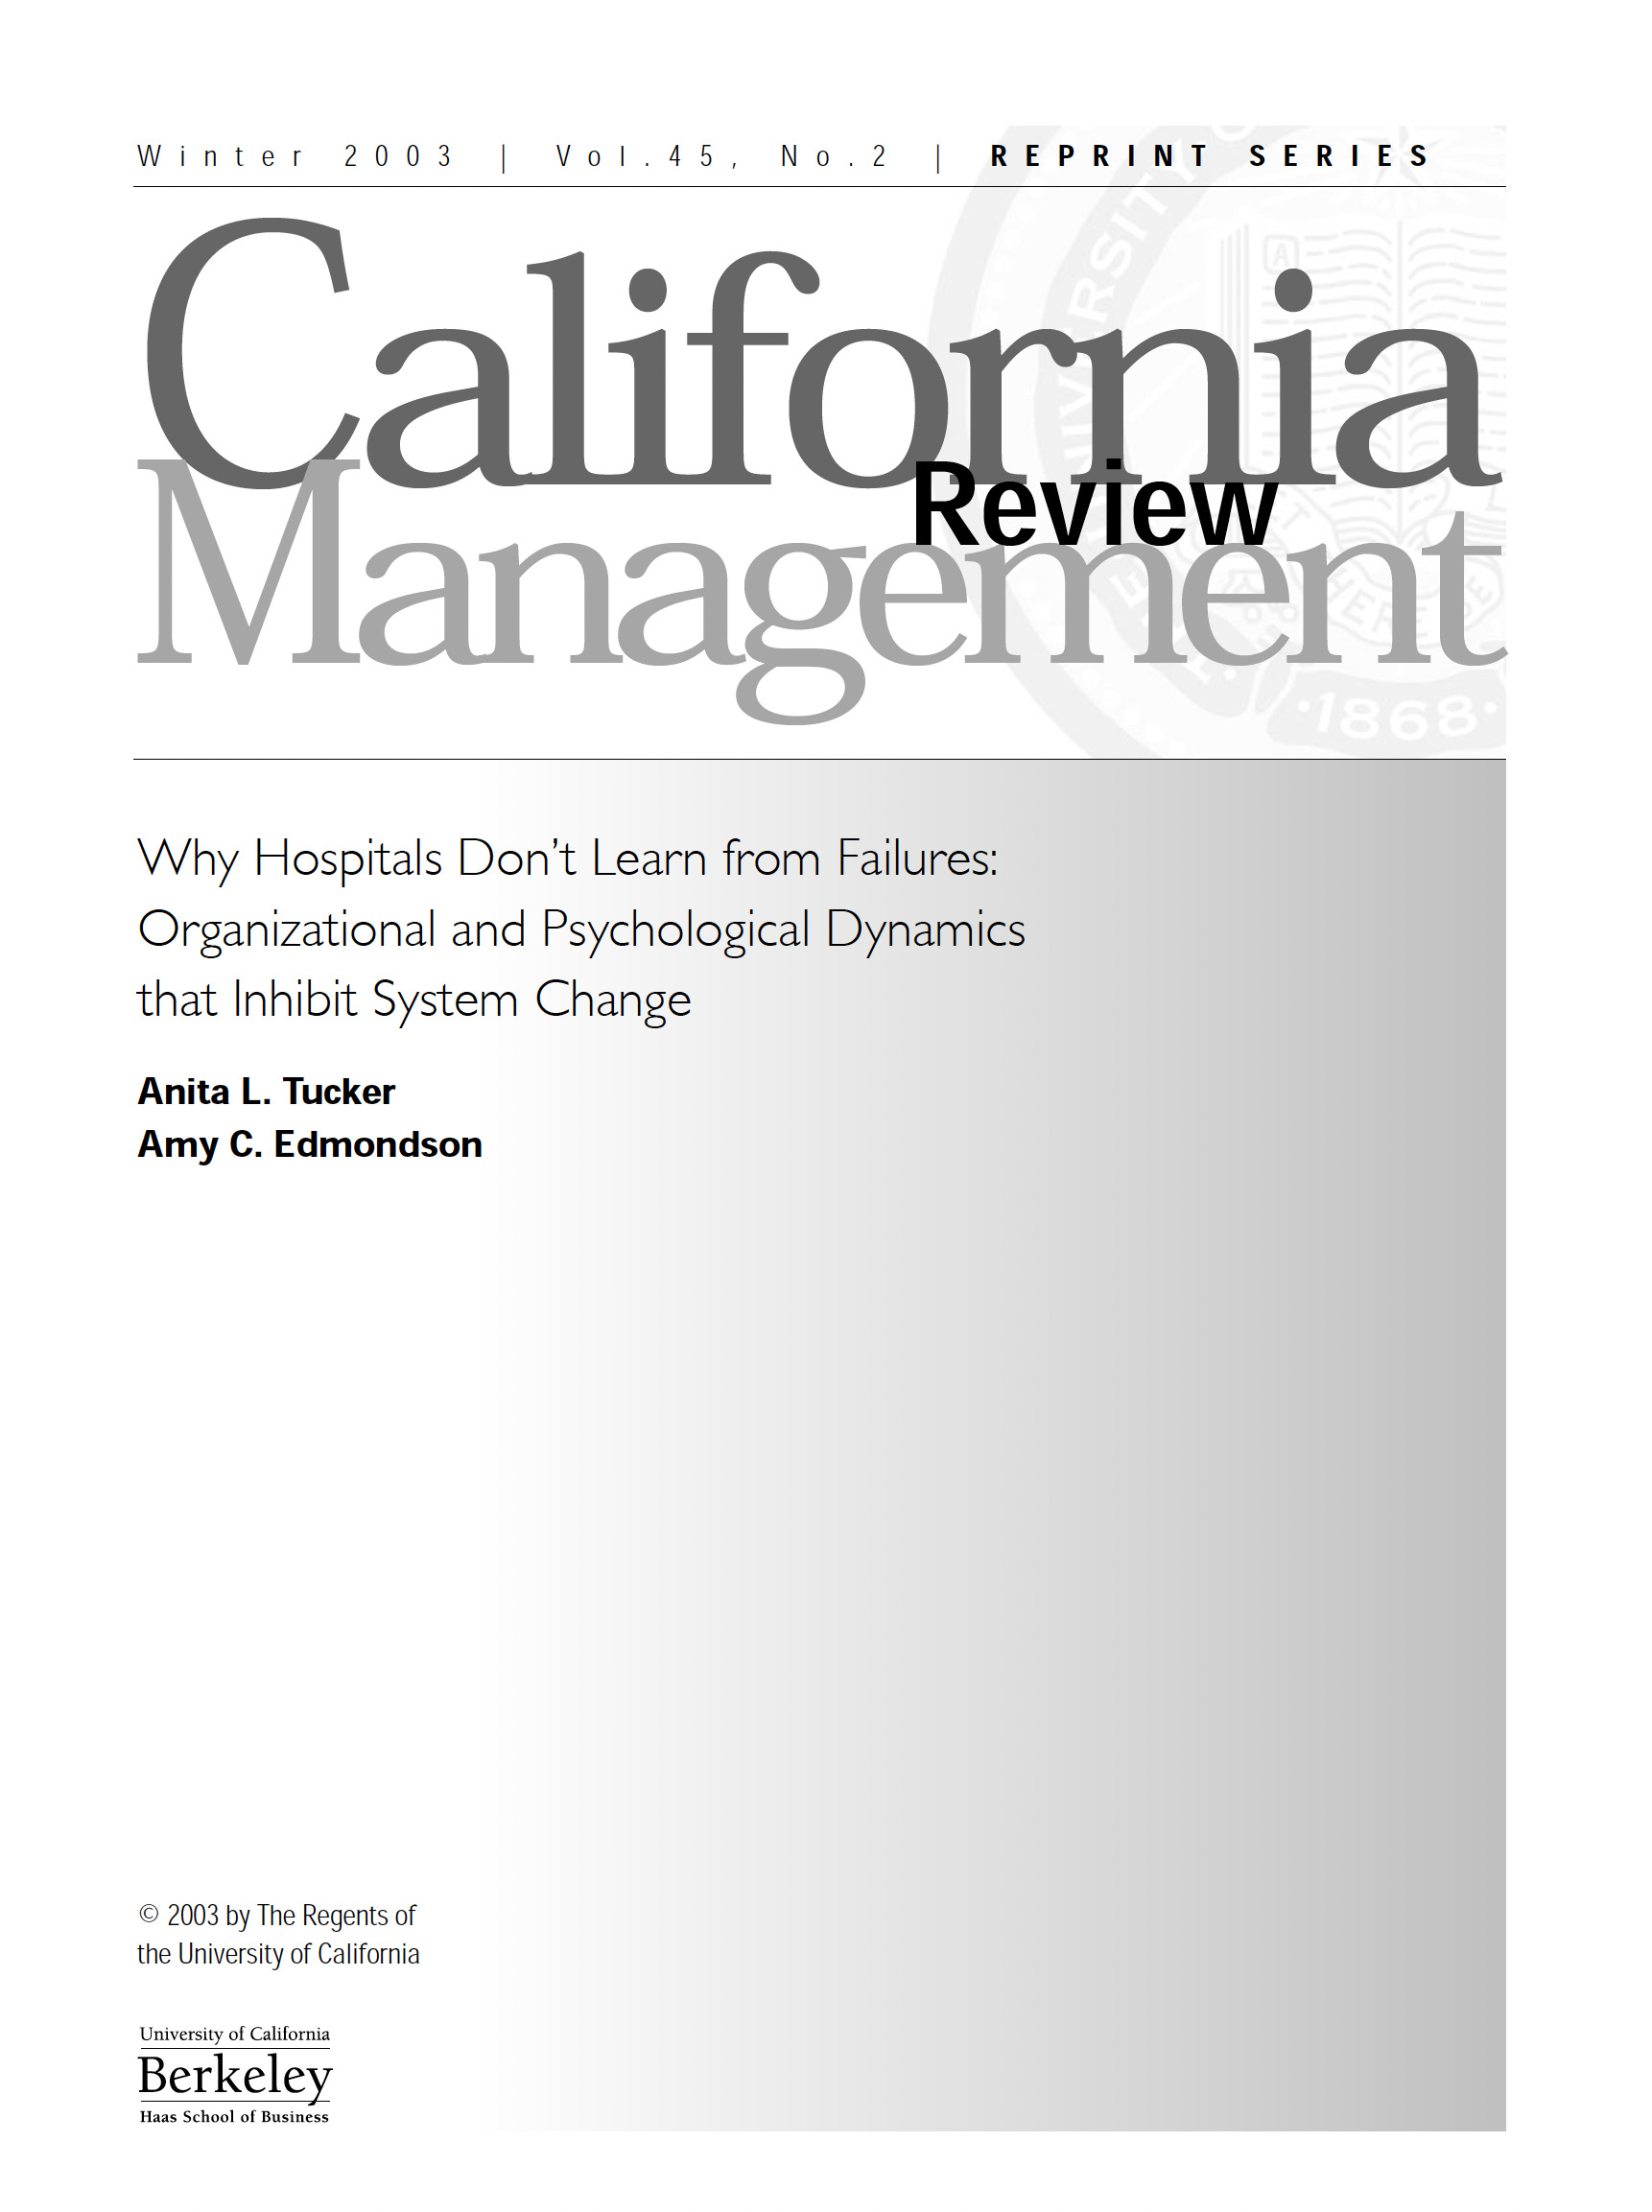 Cover for research article Why Hospitals Don't Learn from Failures